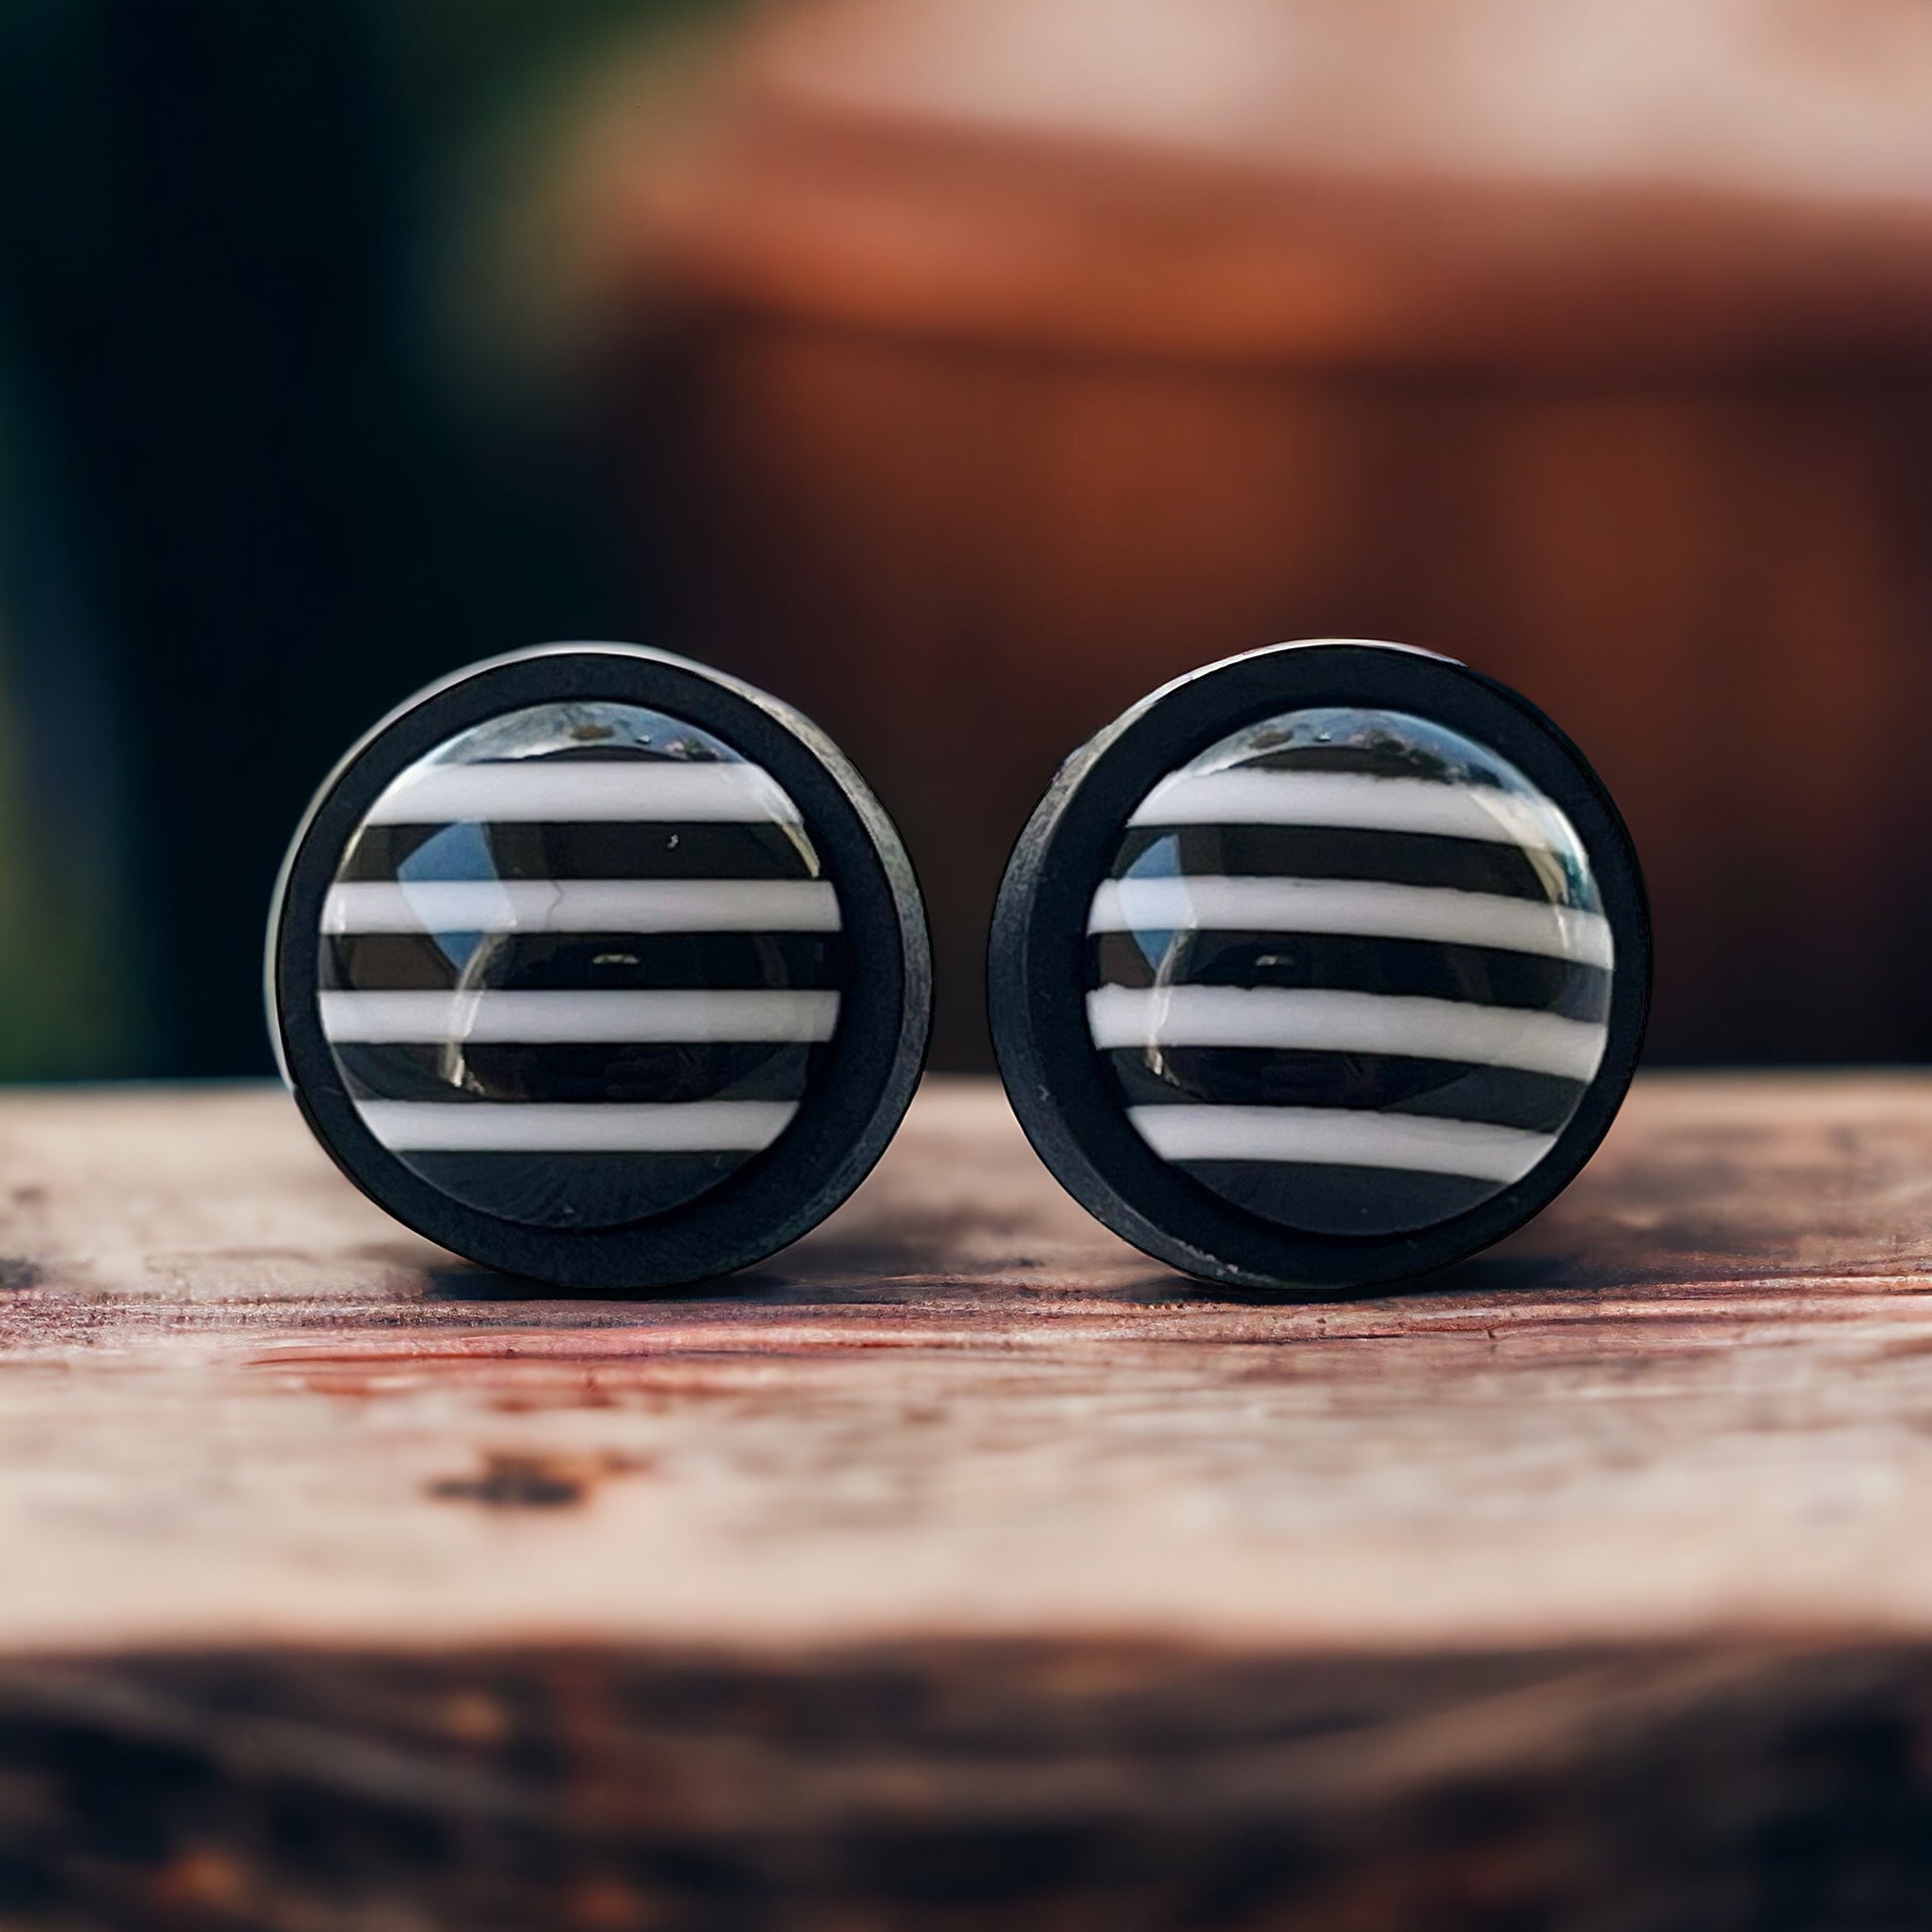 Black & White Large Striped Wood Earrings - Statement Monochrome Accessories